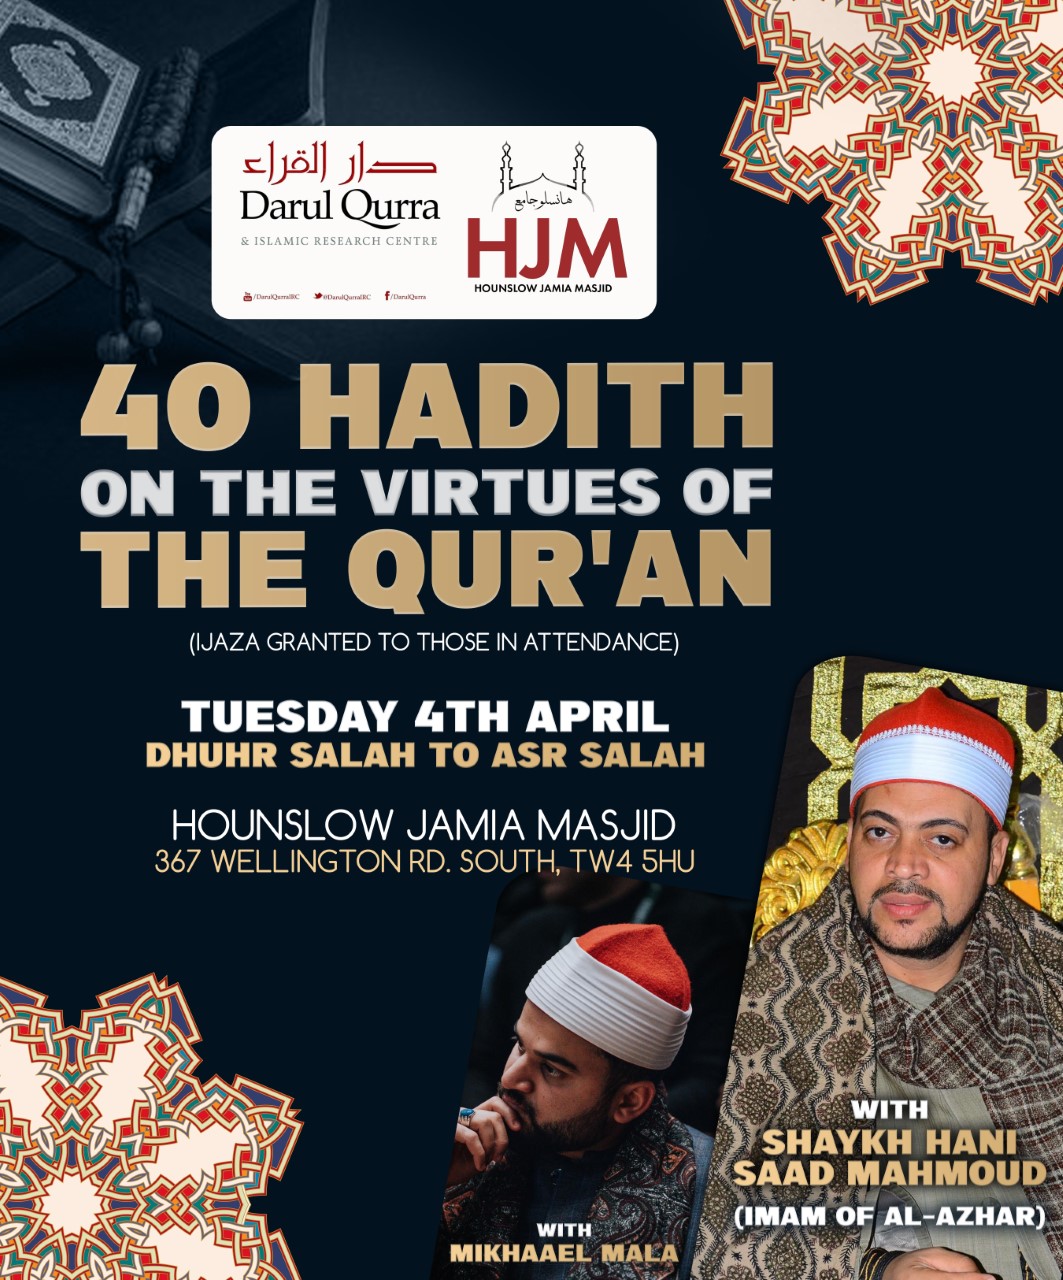 40 Hadith On The Virtues Of The Qur’an